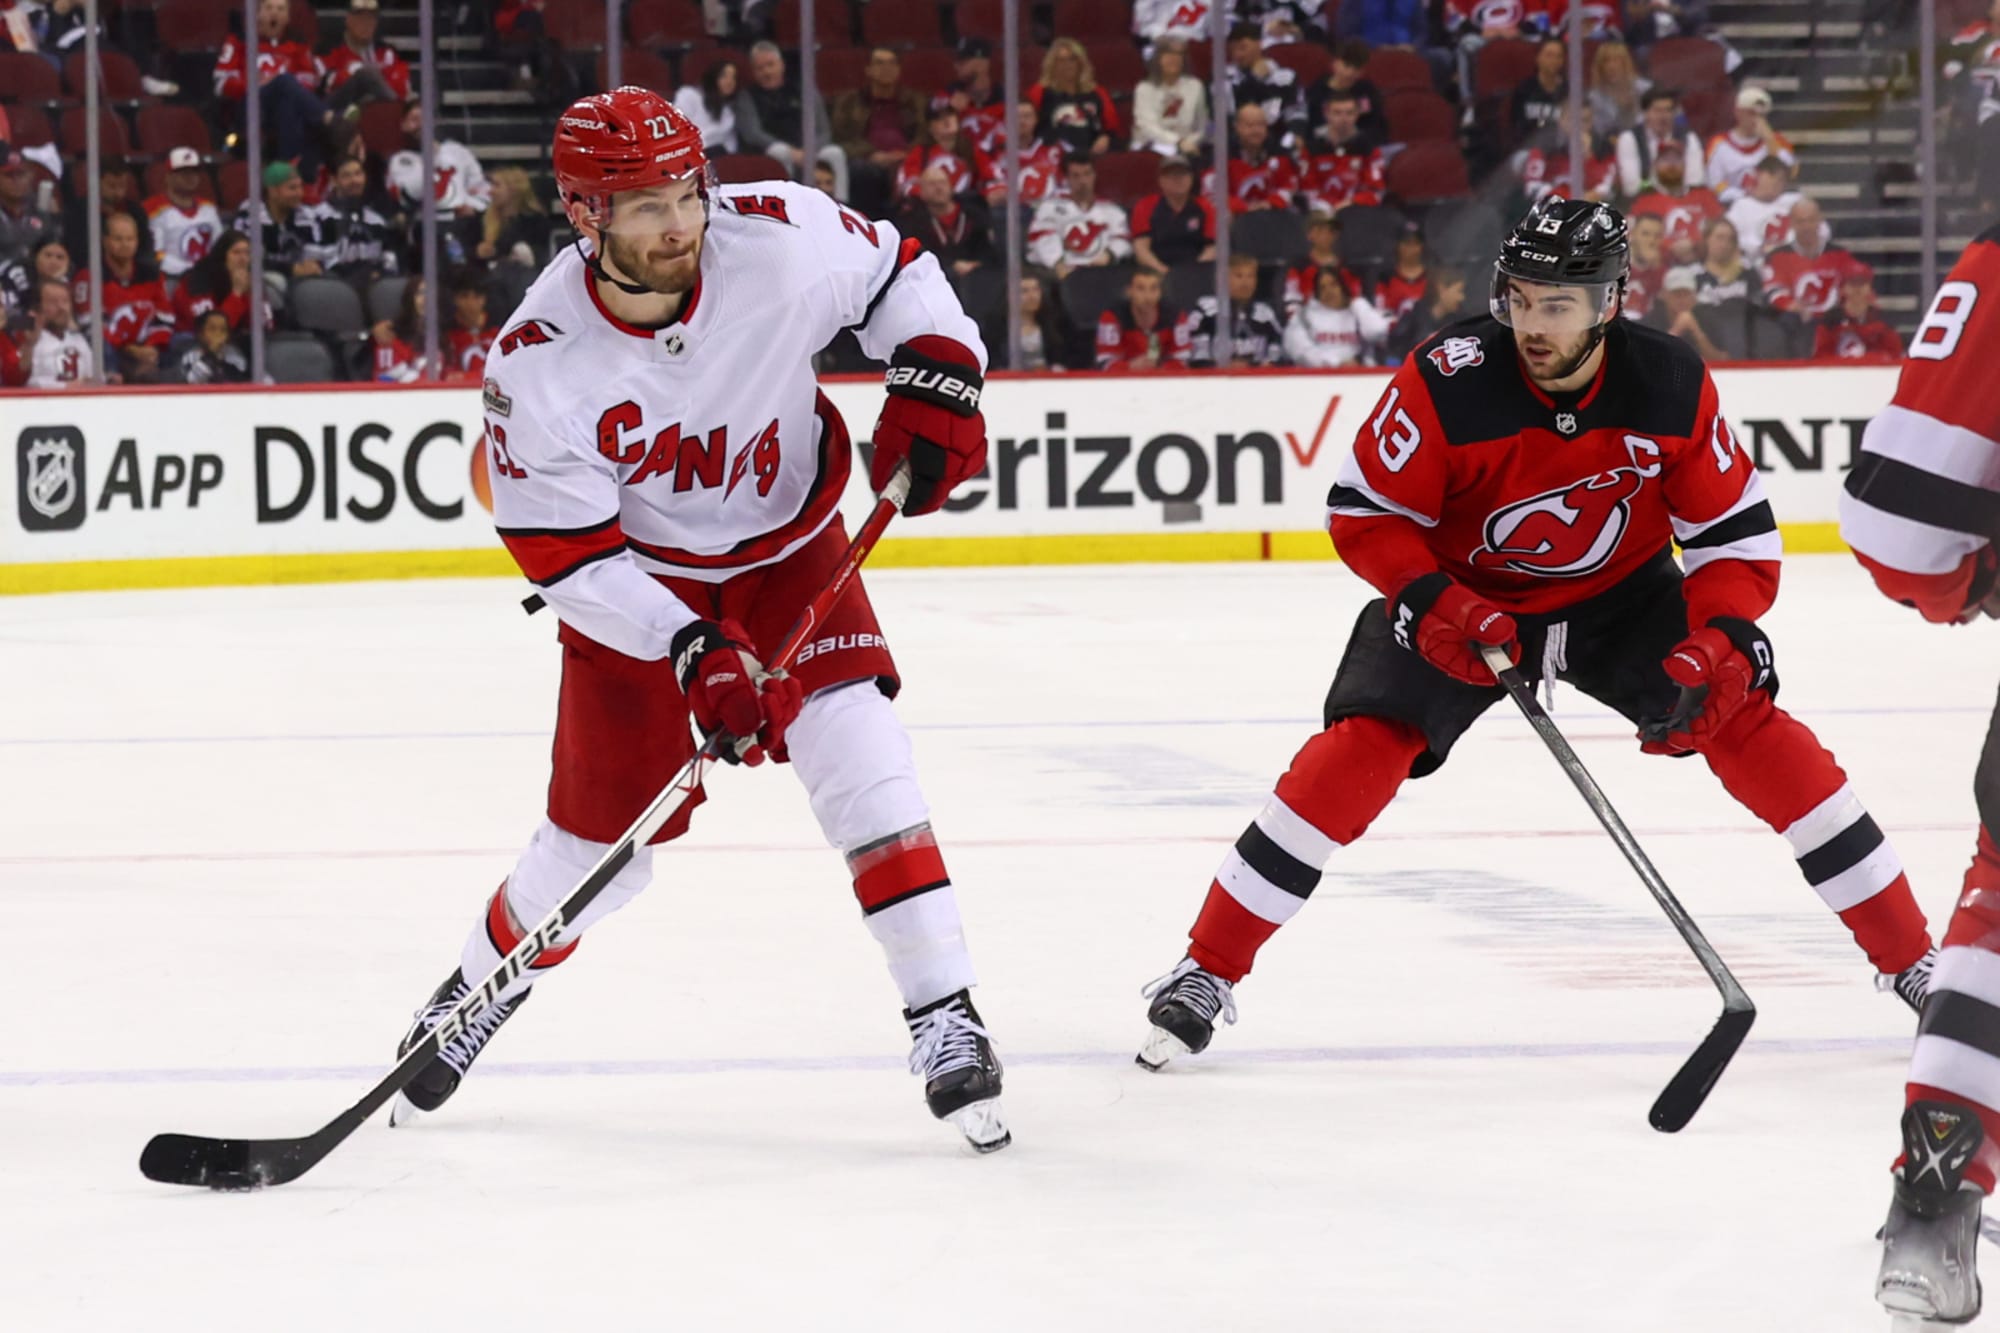 If Brett Pesce is Available, the Flyers Should Inquire